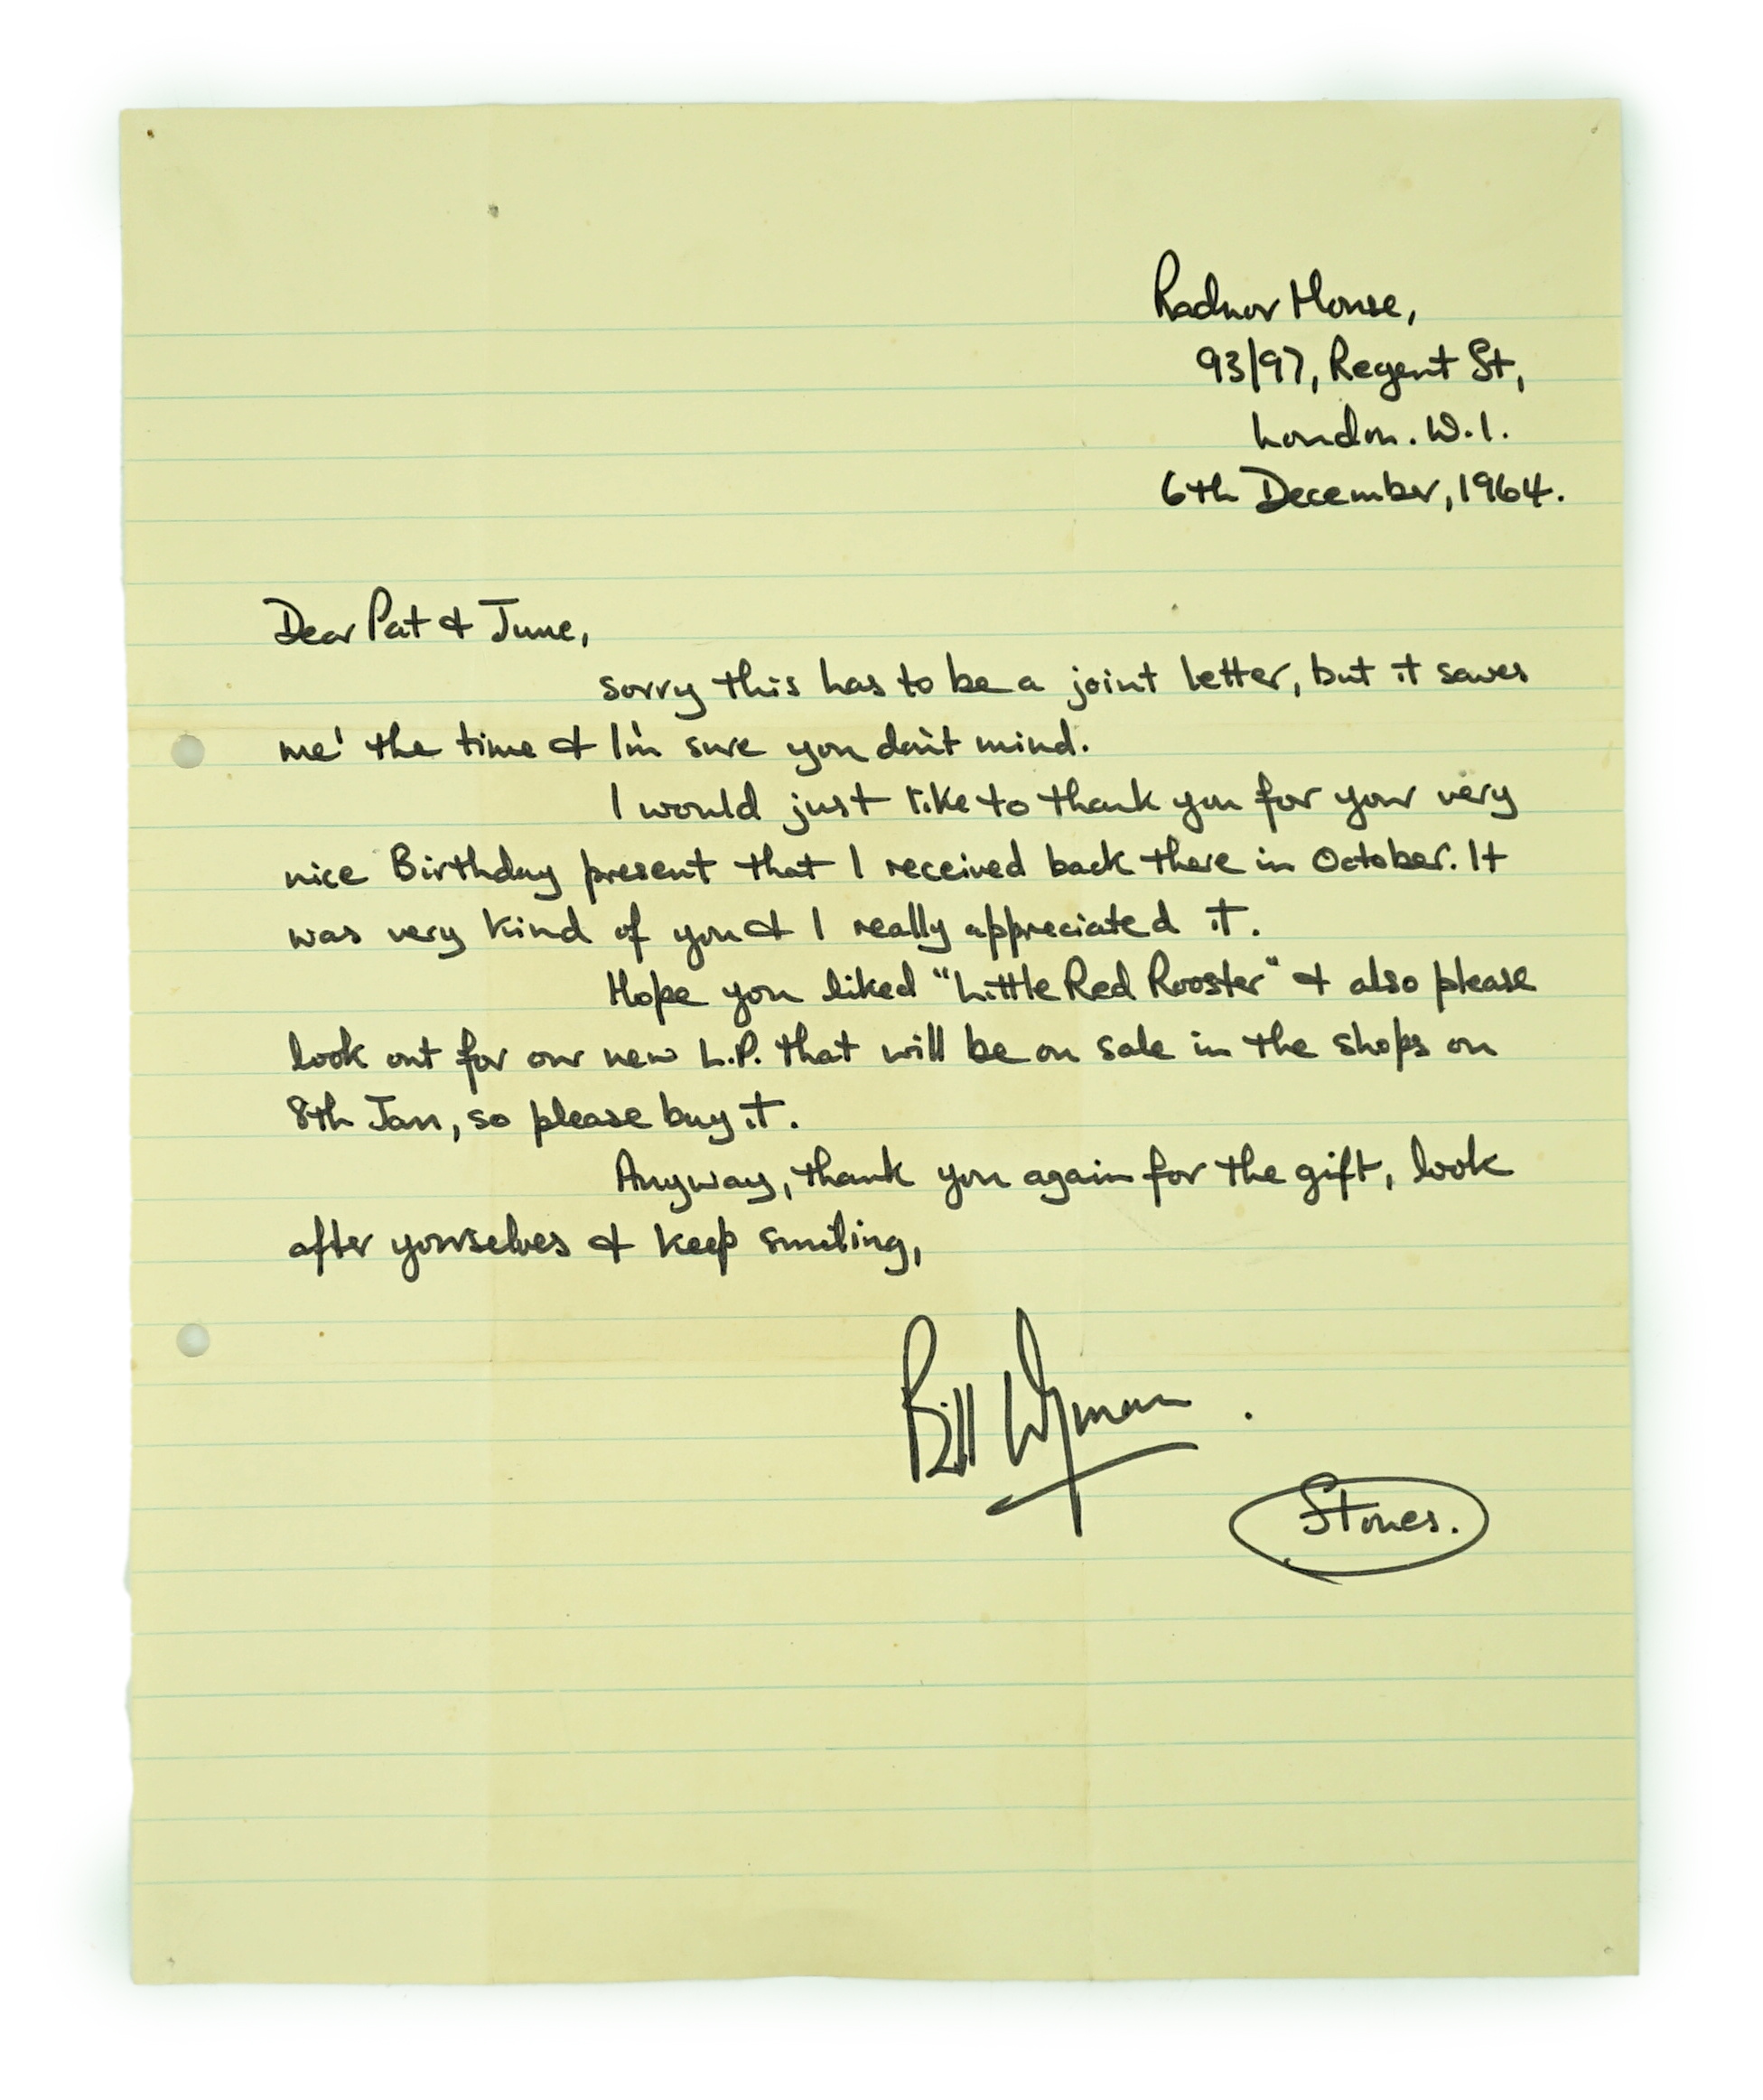 Rolling Stones interest; a hand written letter by Bill Wyman, dated 6th December 1964, together with the original envelope (also in Bill Wyman’s hand) postmarked 7 Dec 1964, sent from Radnor House (which housed the offic